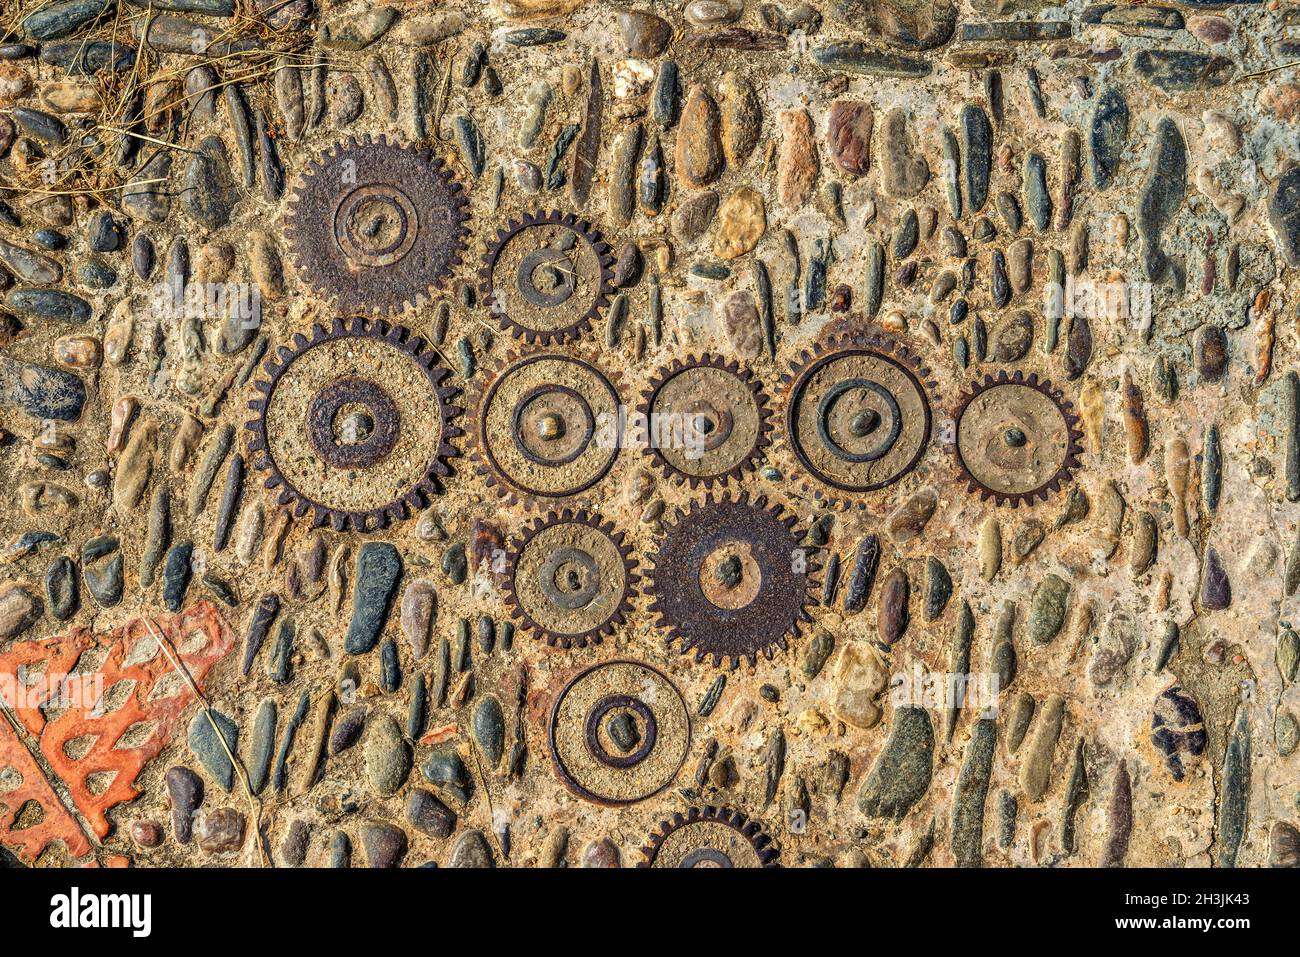 Pavement texture with gears and bricks in Montjuic, Barcelona, Spain Stock Photo